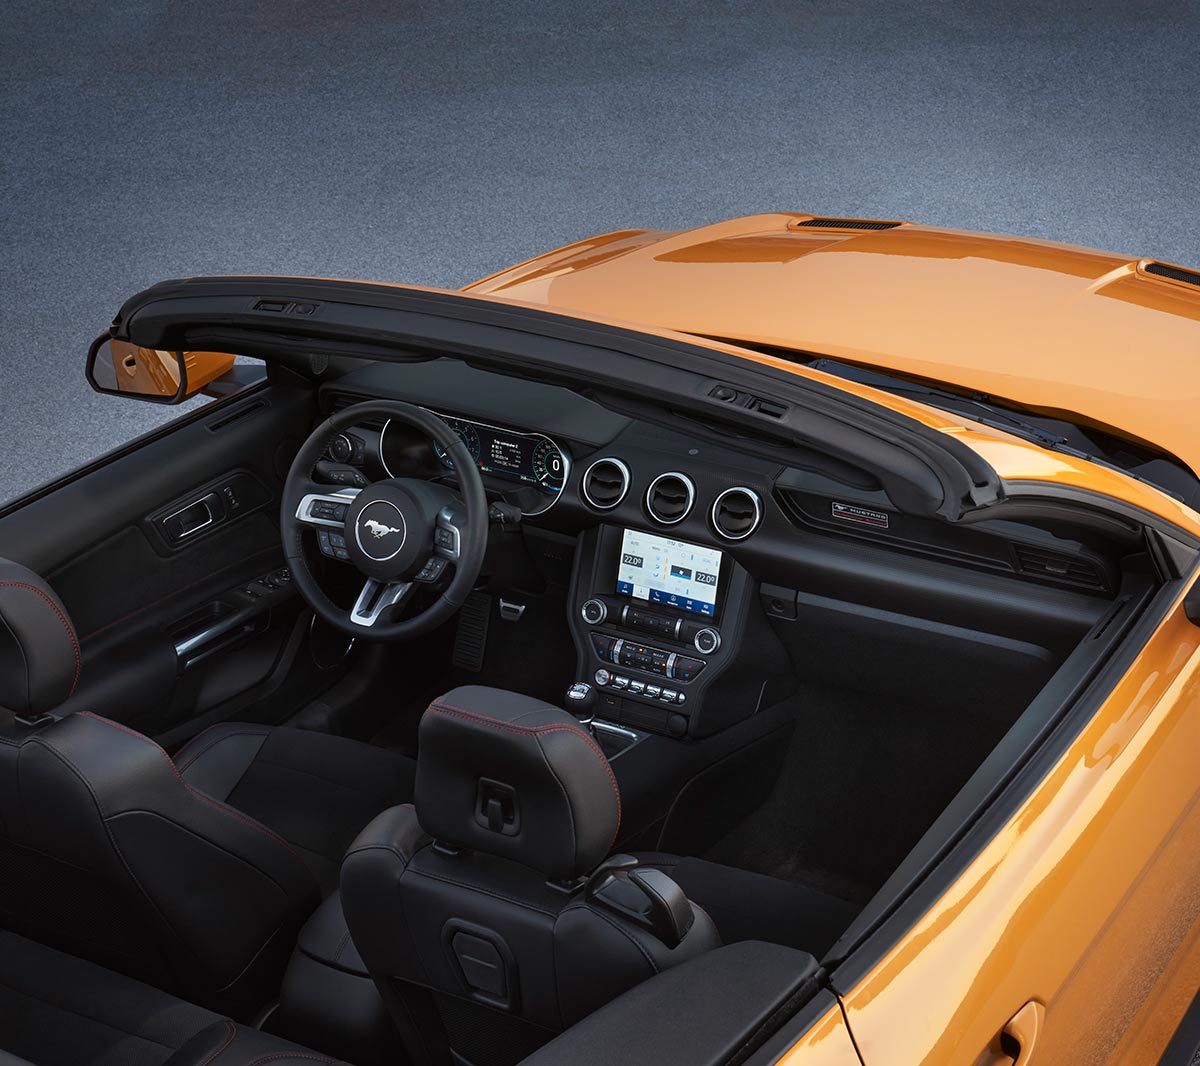 Ford Mustang California Edition interior dashboard design viewed from above